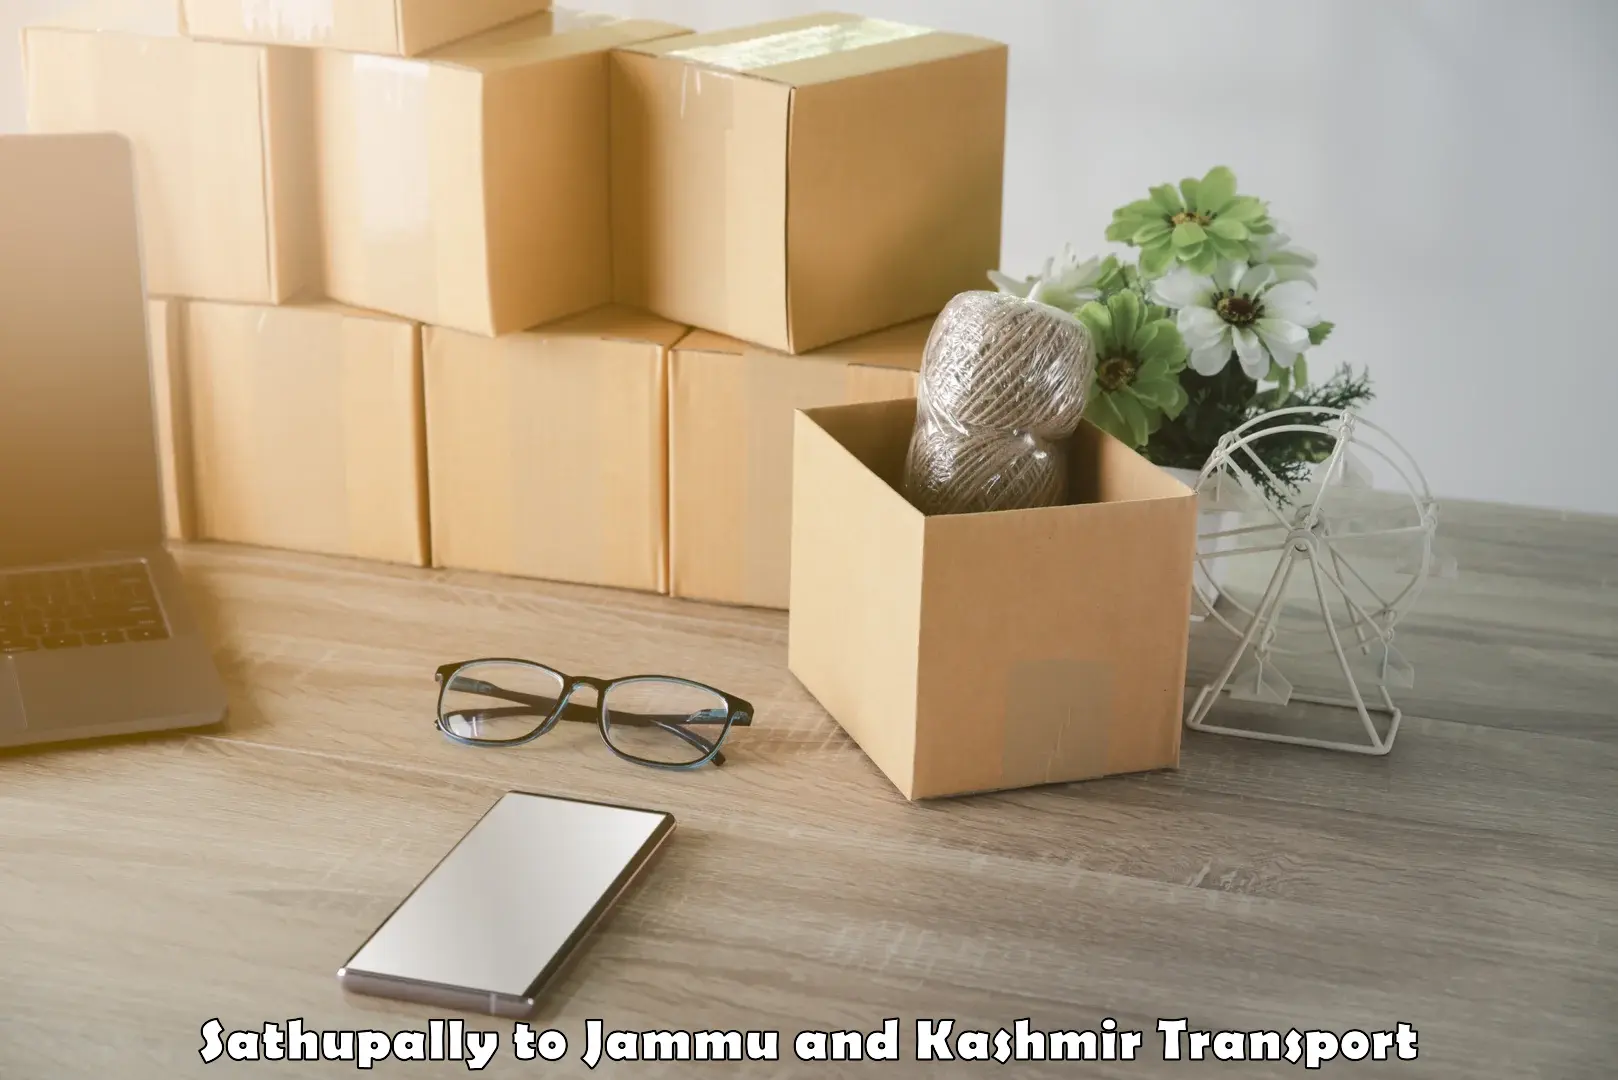 Road transport online services Sathupally to Pulwama